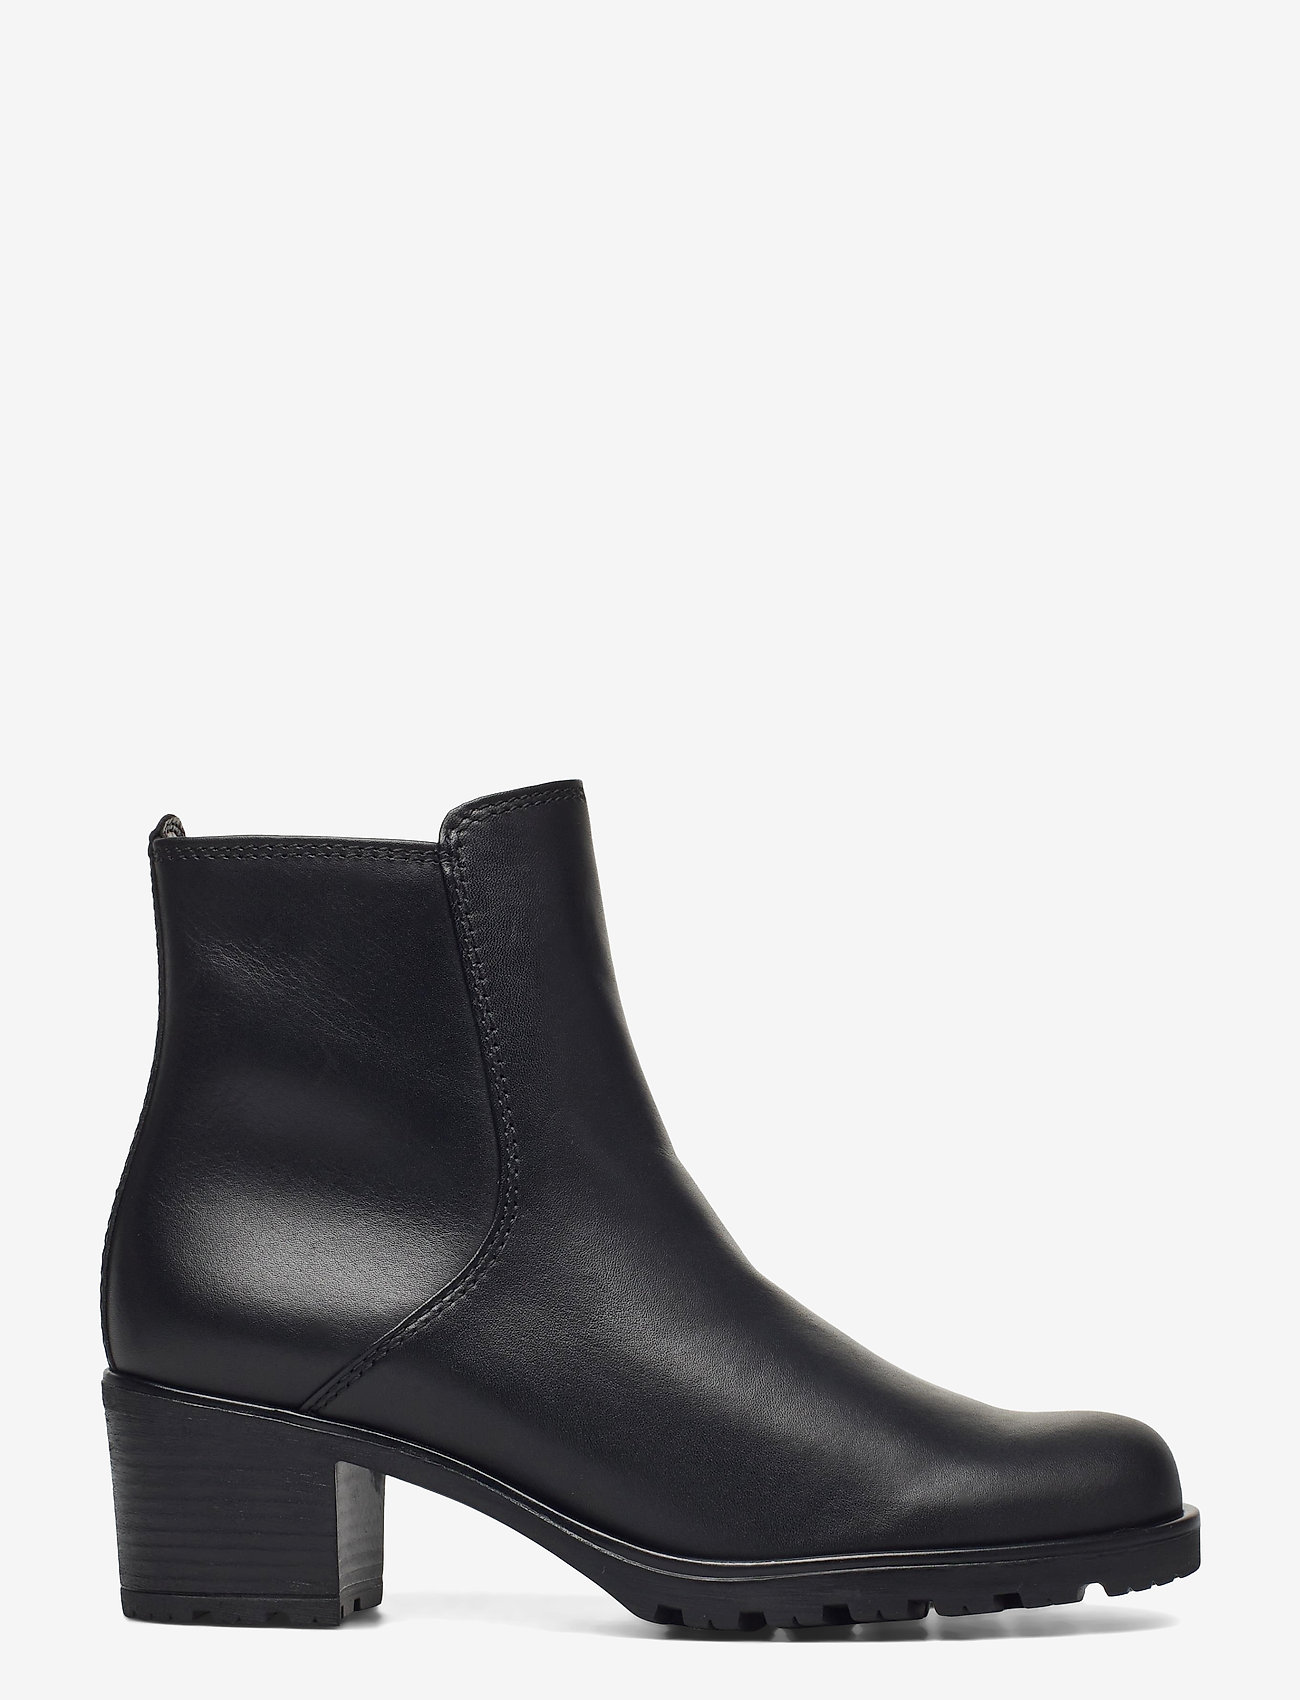 Gabor Ankle Boot - Heeled ankle boots | Boozt.com